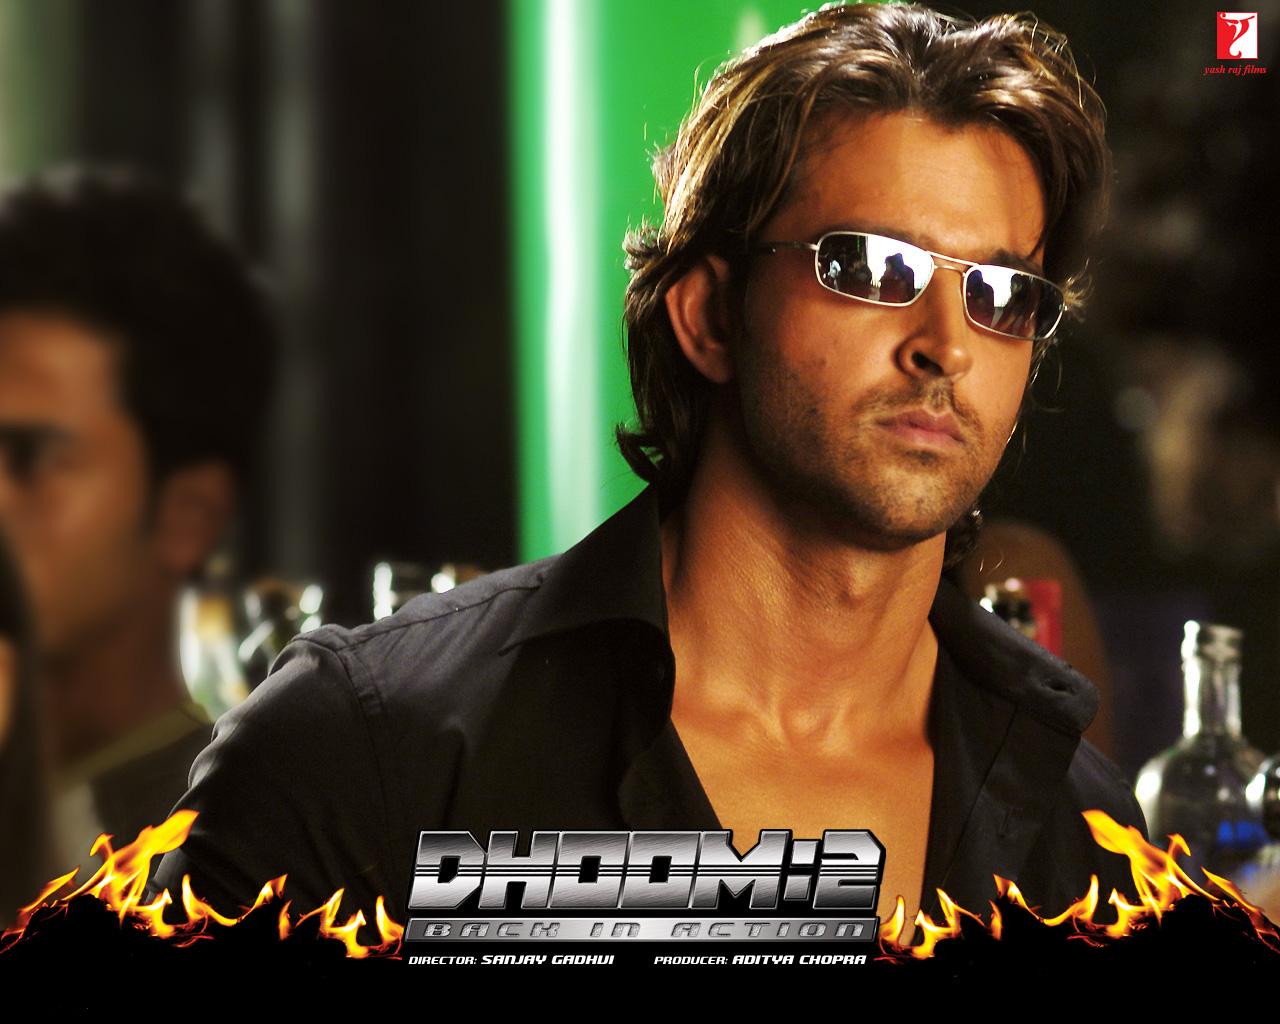 Download Free HD Wallpapers Of Hrithik Roshan ~ Download Free HD ...